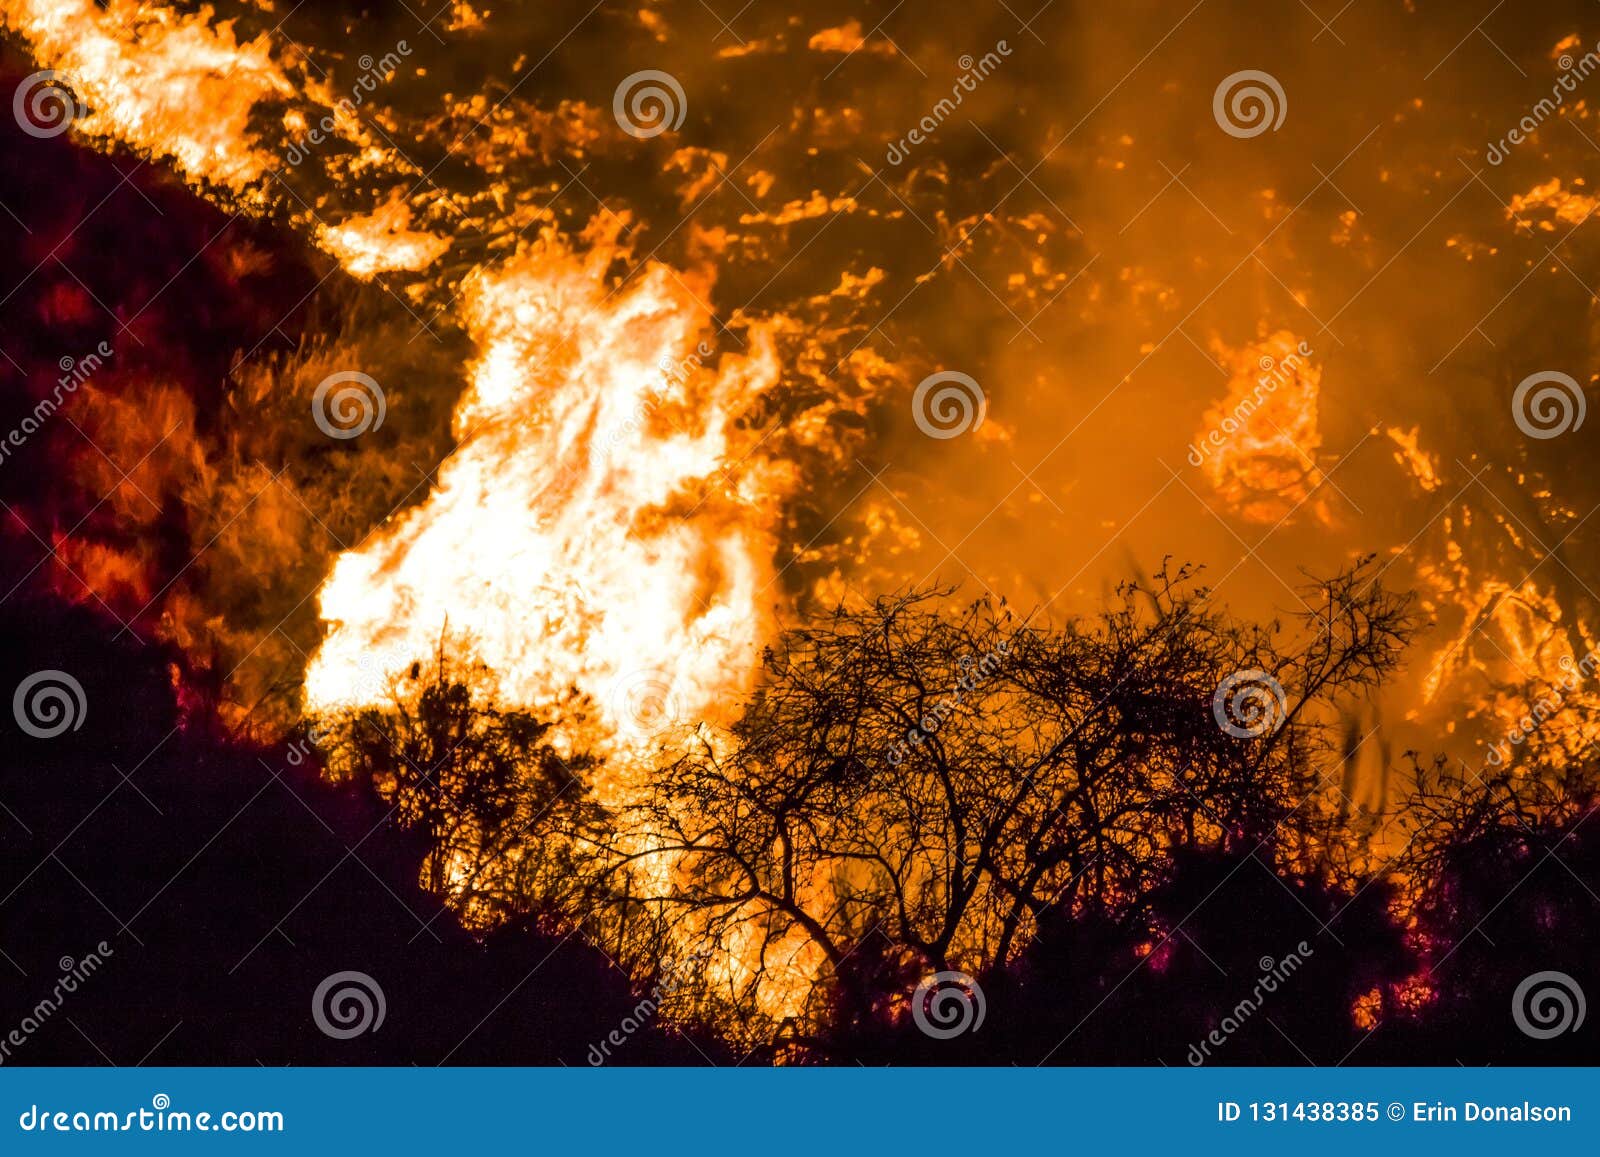 bushes in black silhouette in foreground with bright orange flames in background during california fires